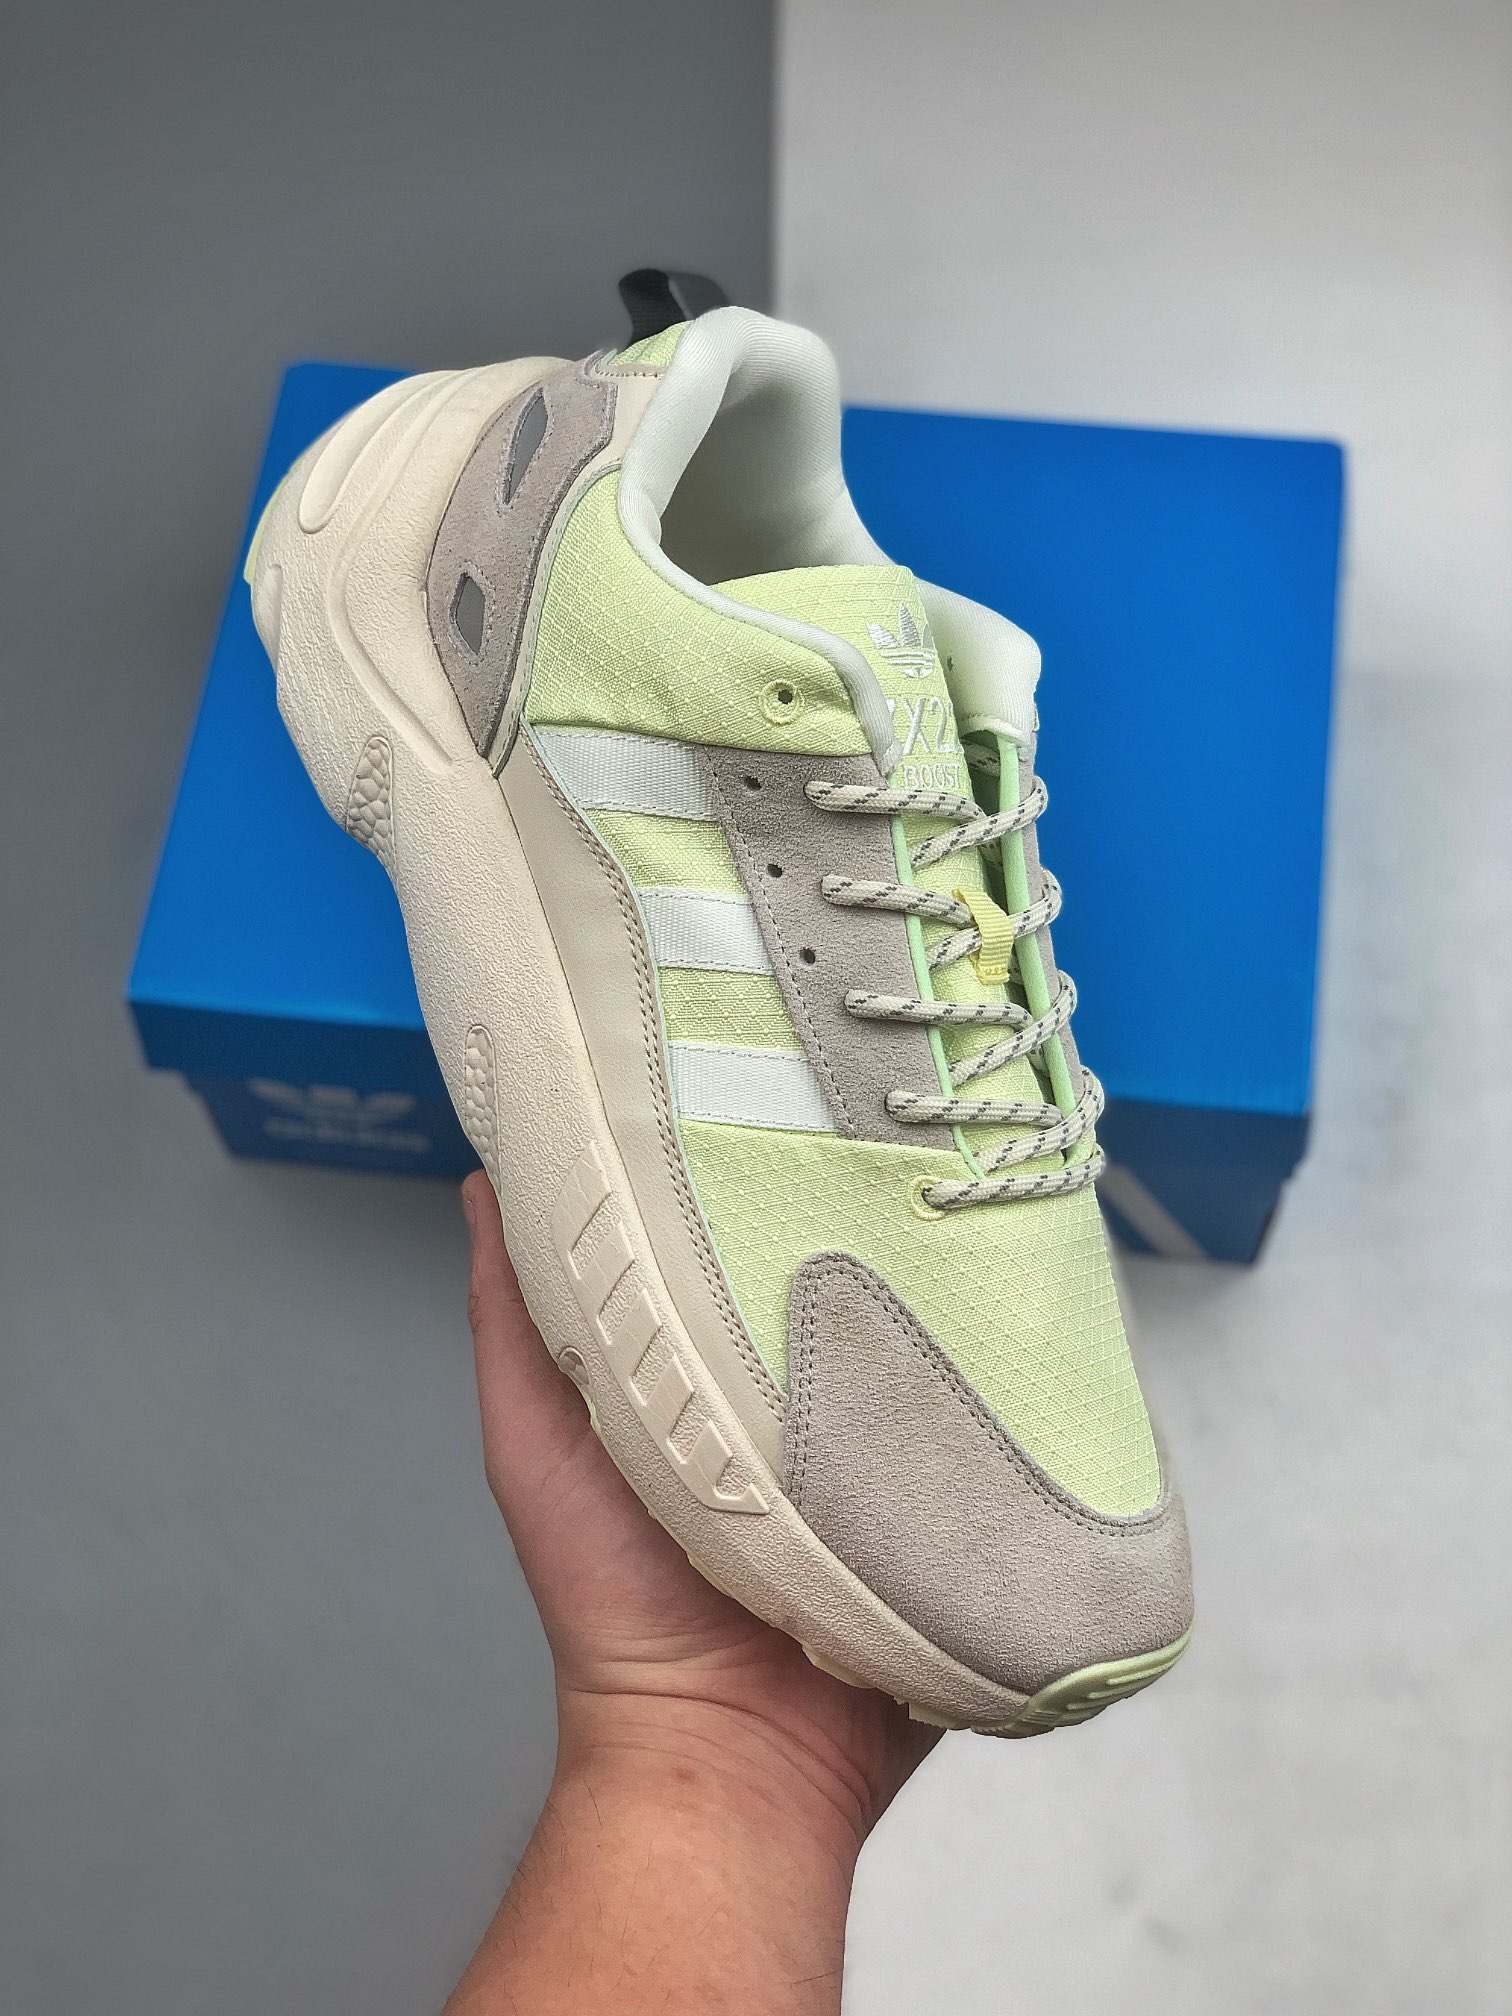 Adidas ZX 22 Boost Sand Yellow Tint GY5271 - Maximum Comfort & Style